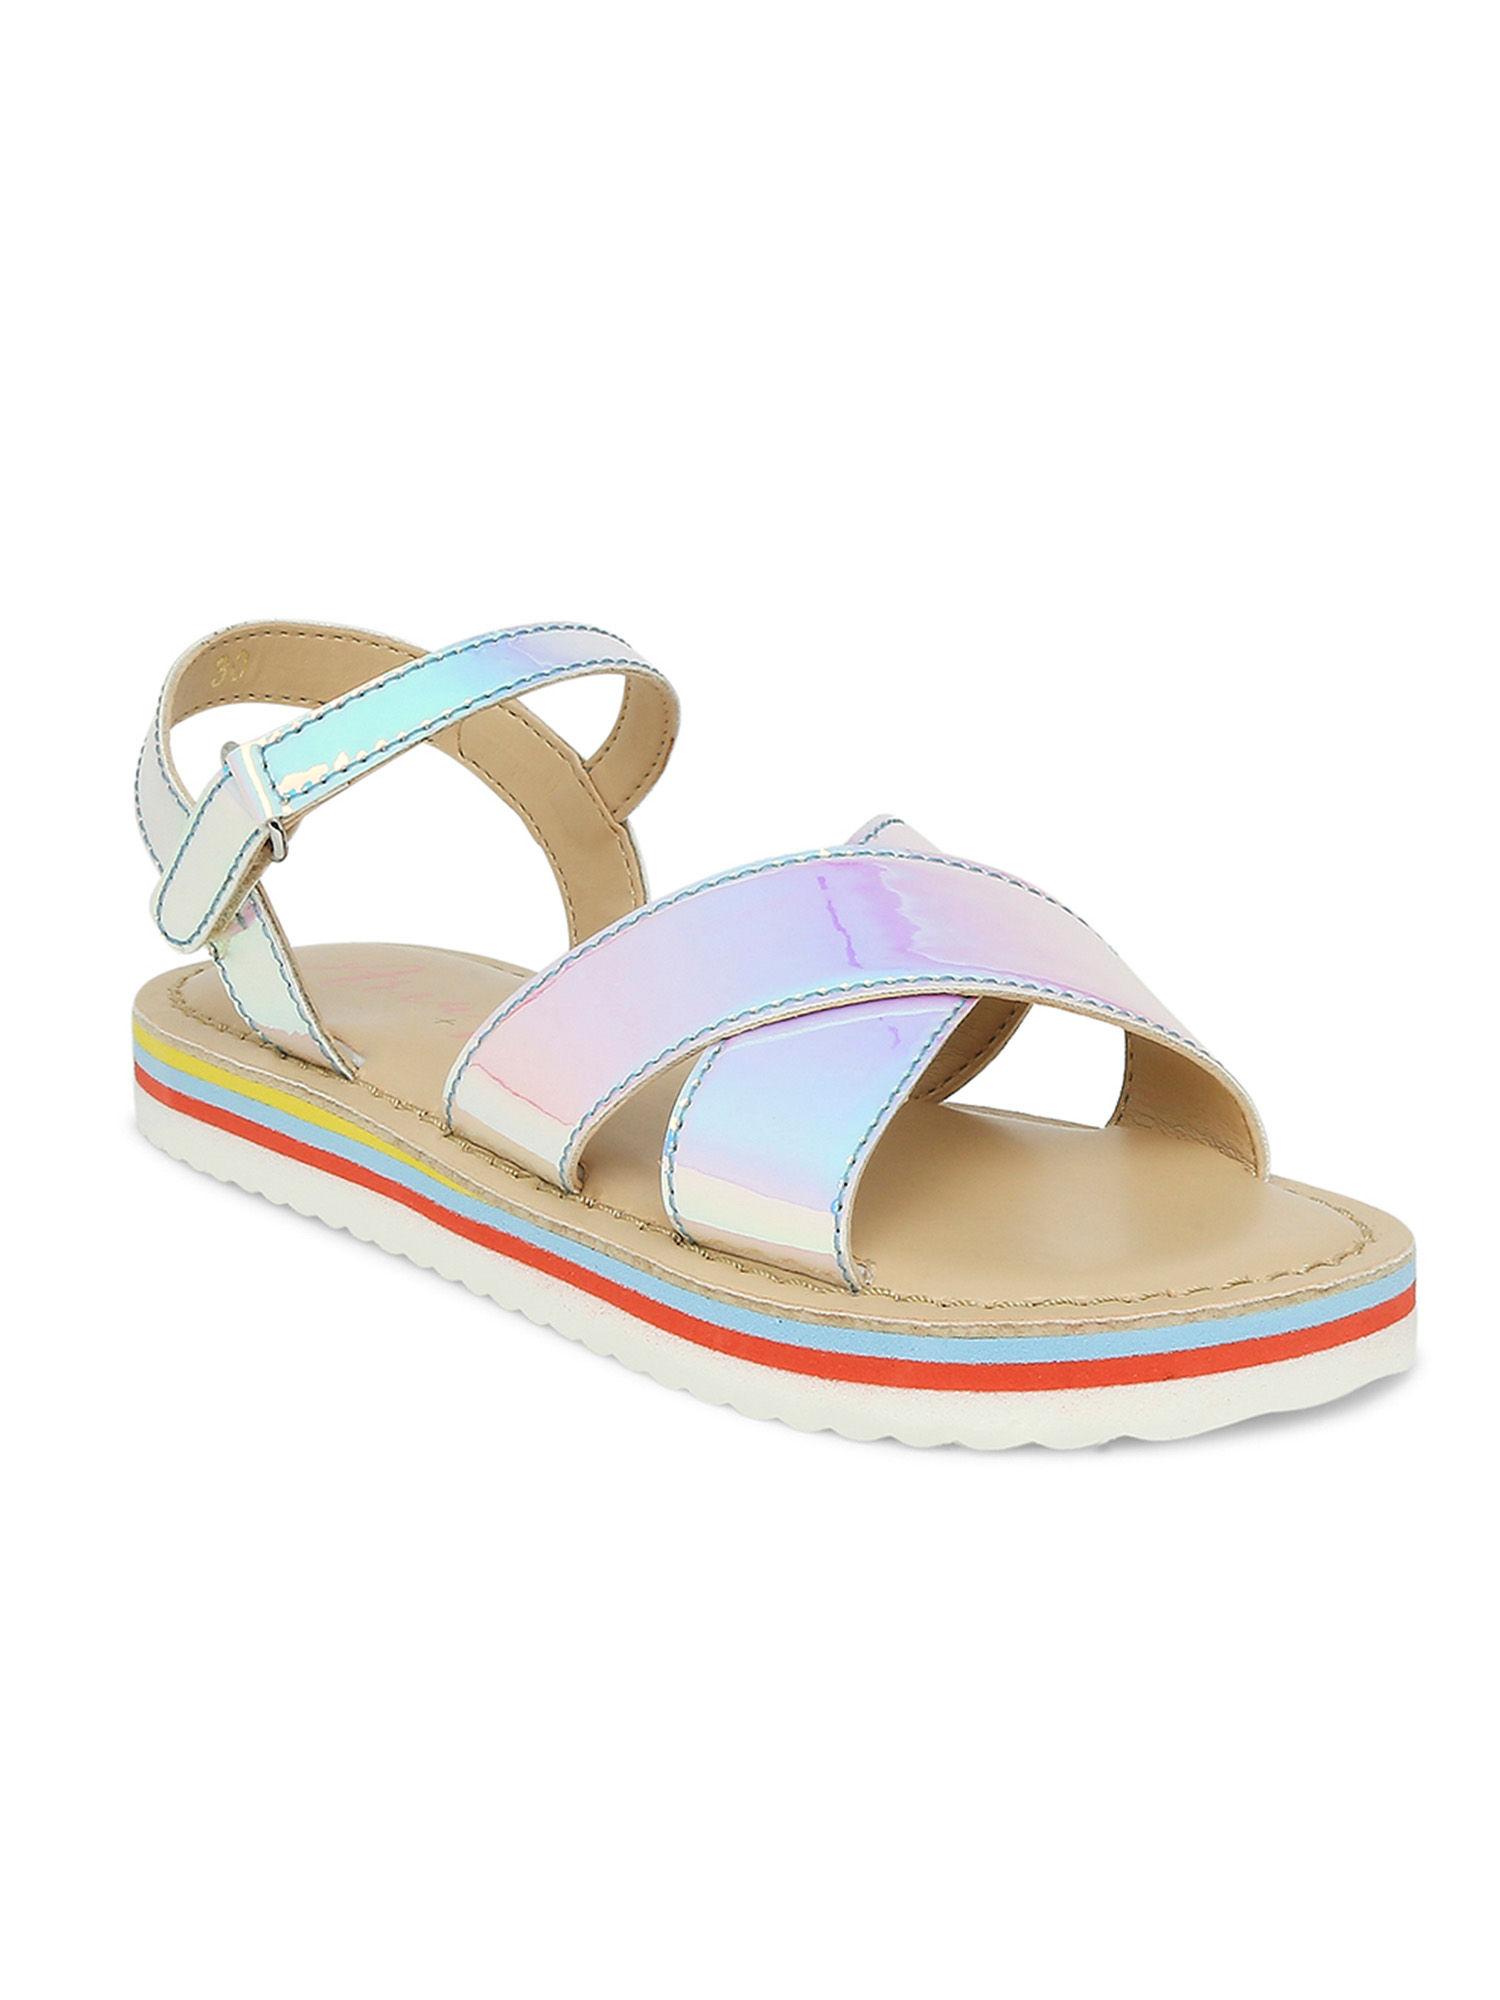 Sky Silver Round Toe Sandals